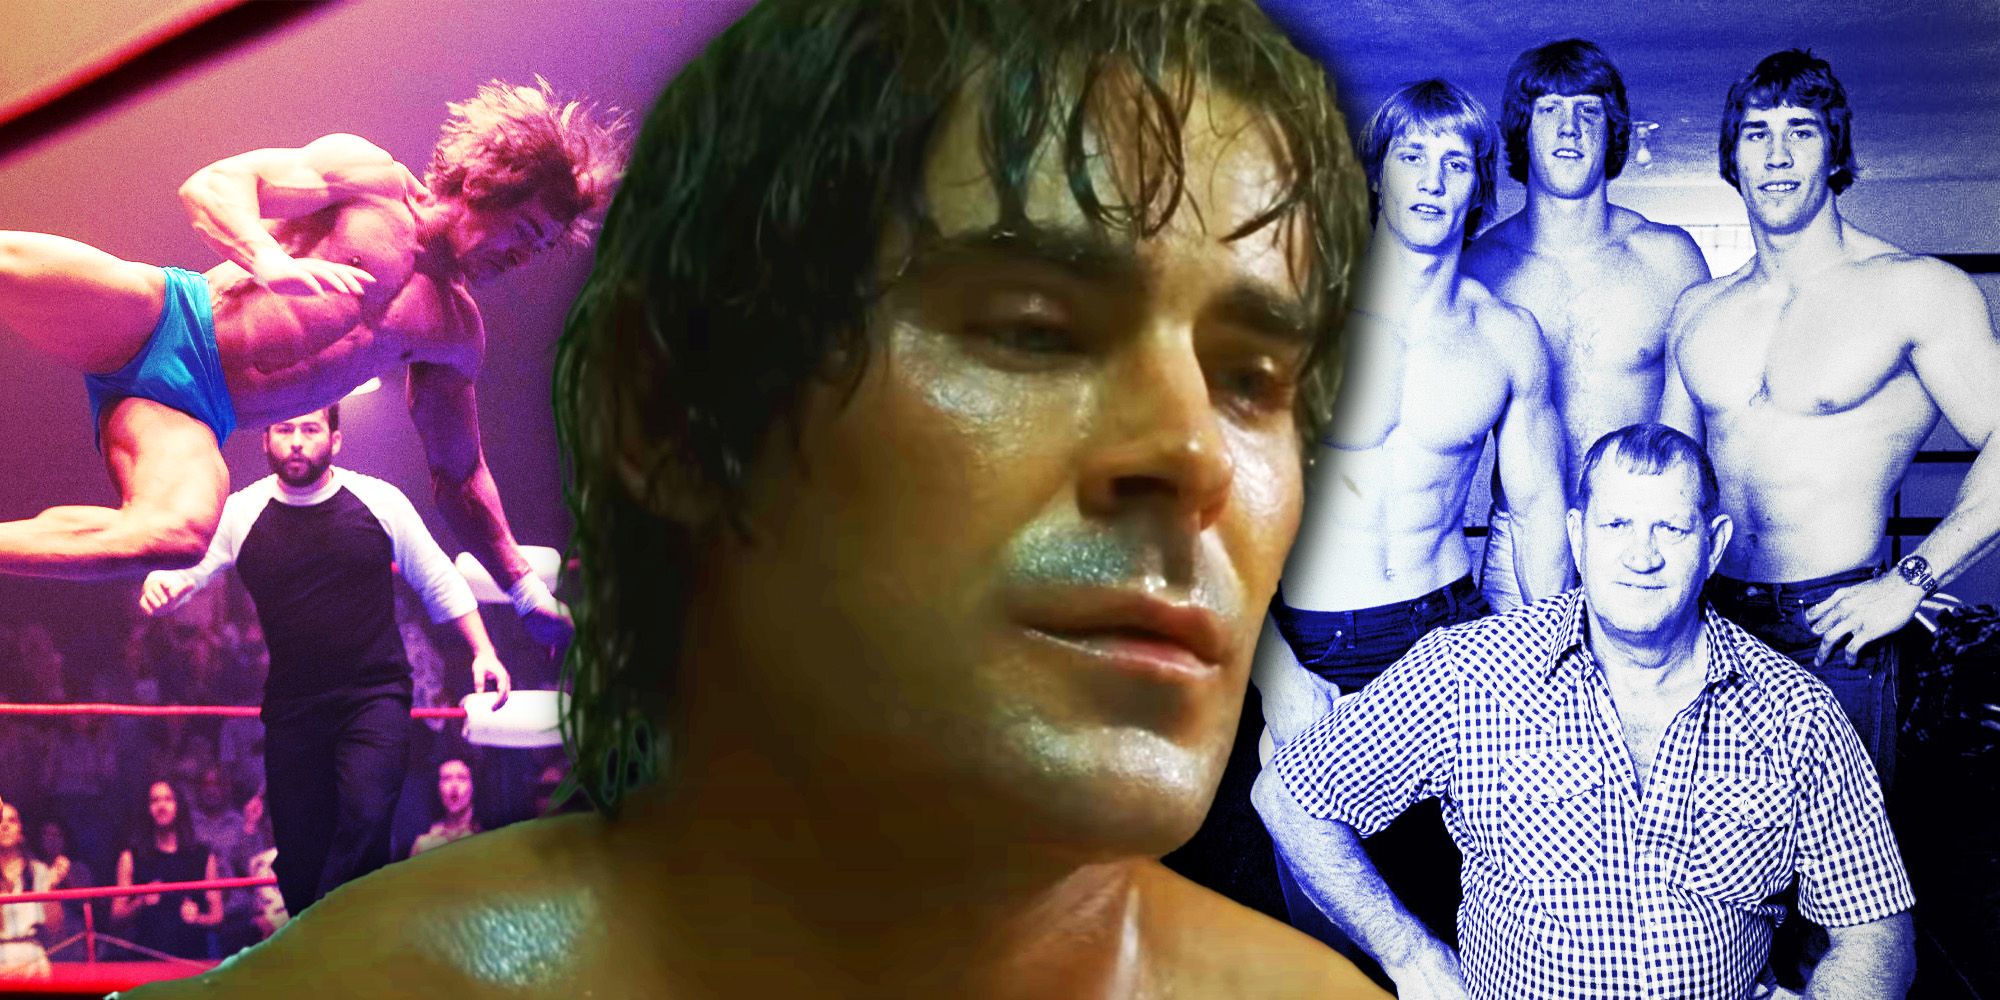 Zac Efron’s Wrestling Movie Has 1 Crucial Endorsement That All But Confirms It’ll Be Great